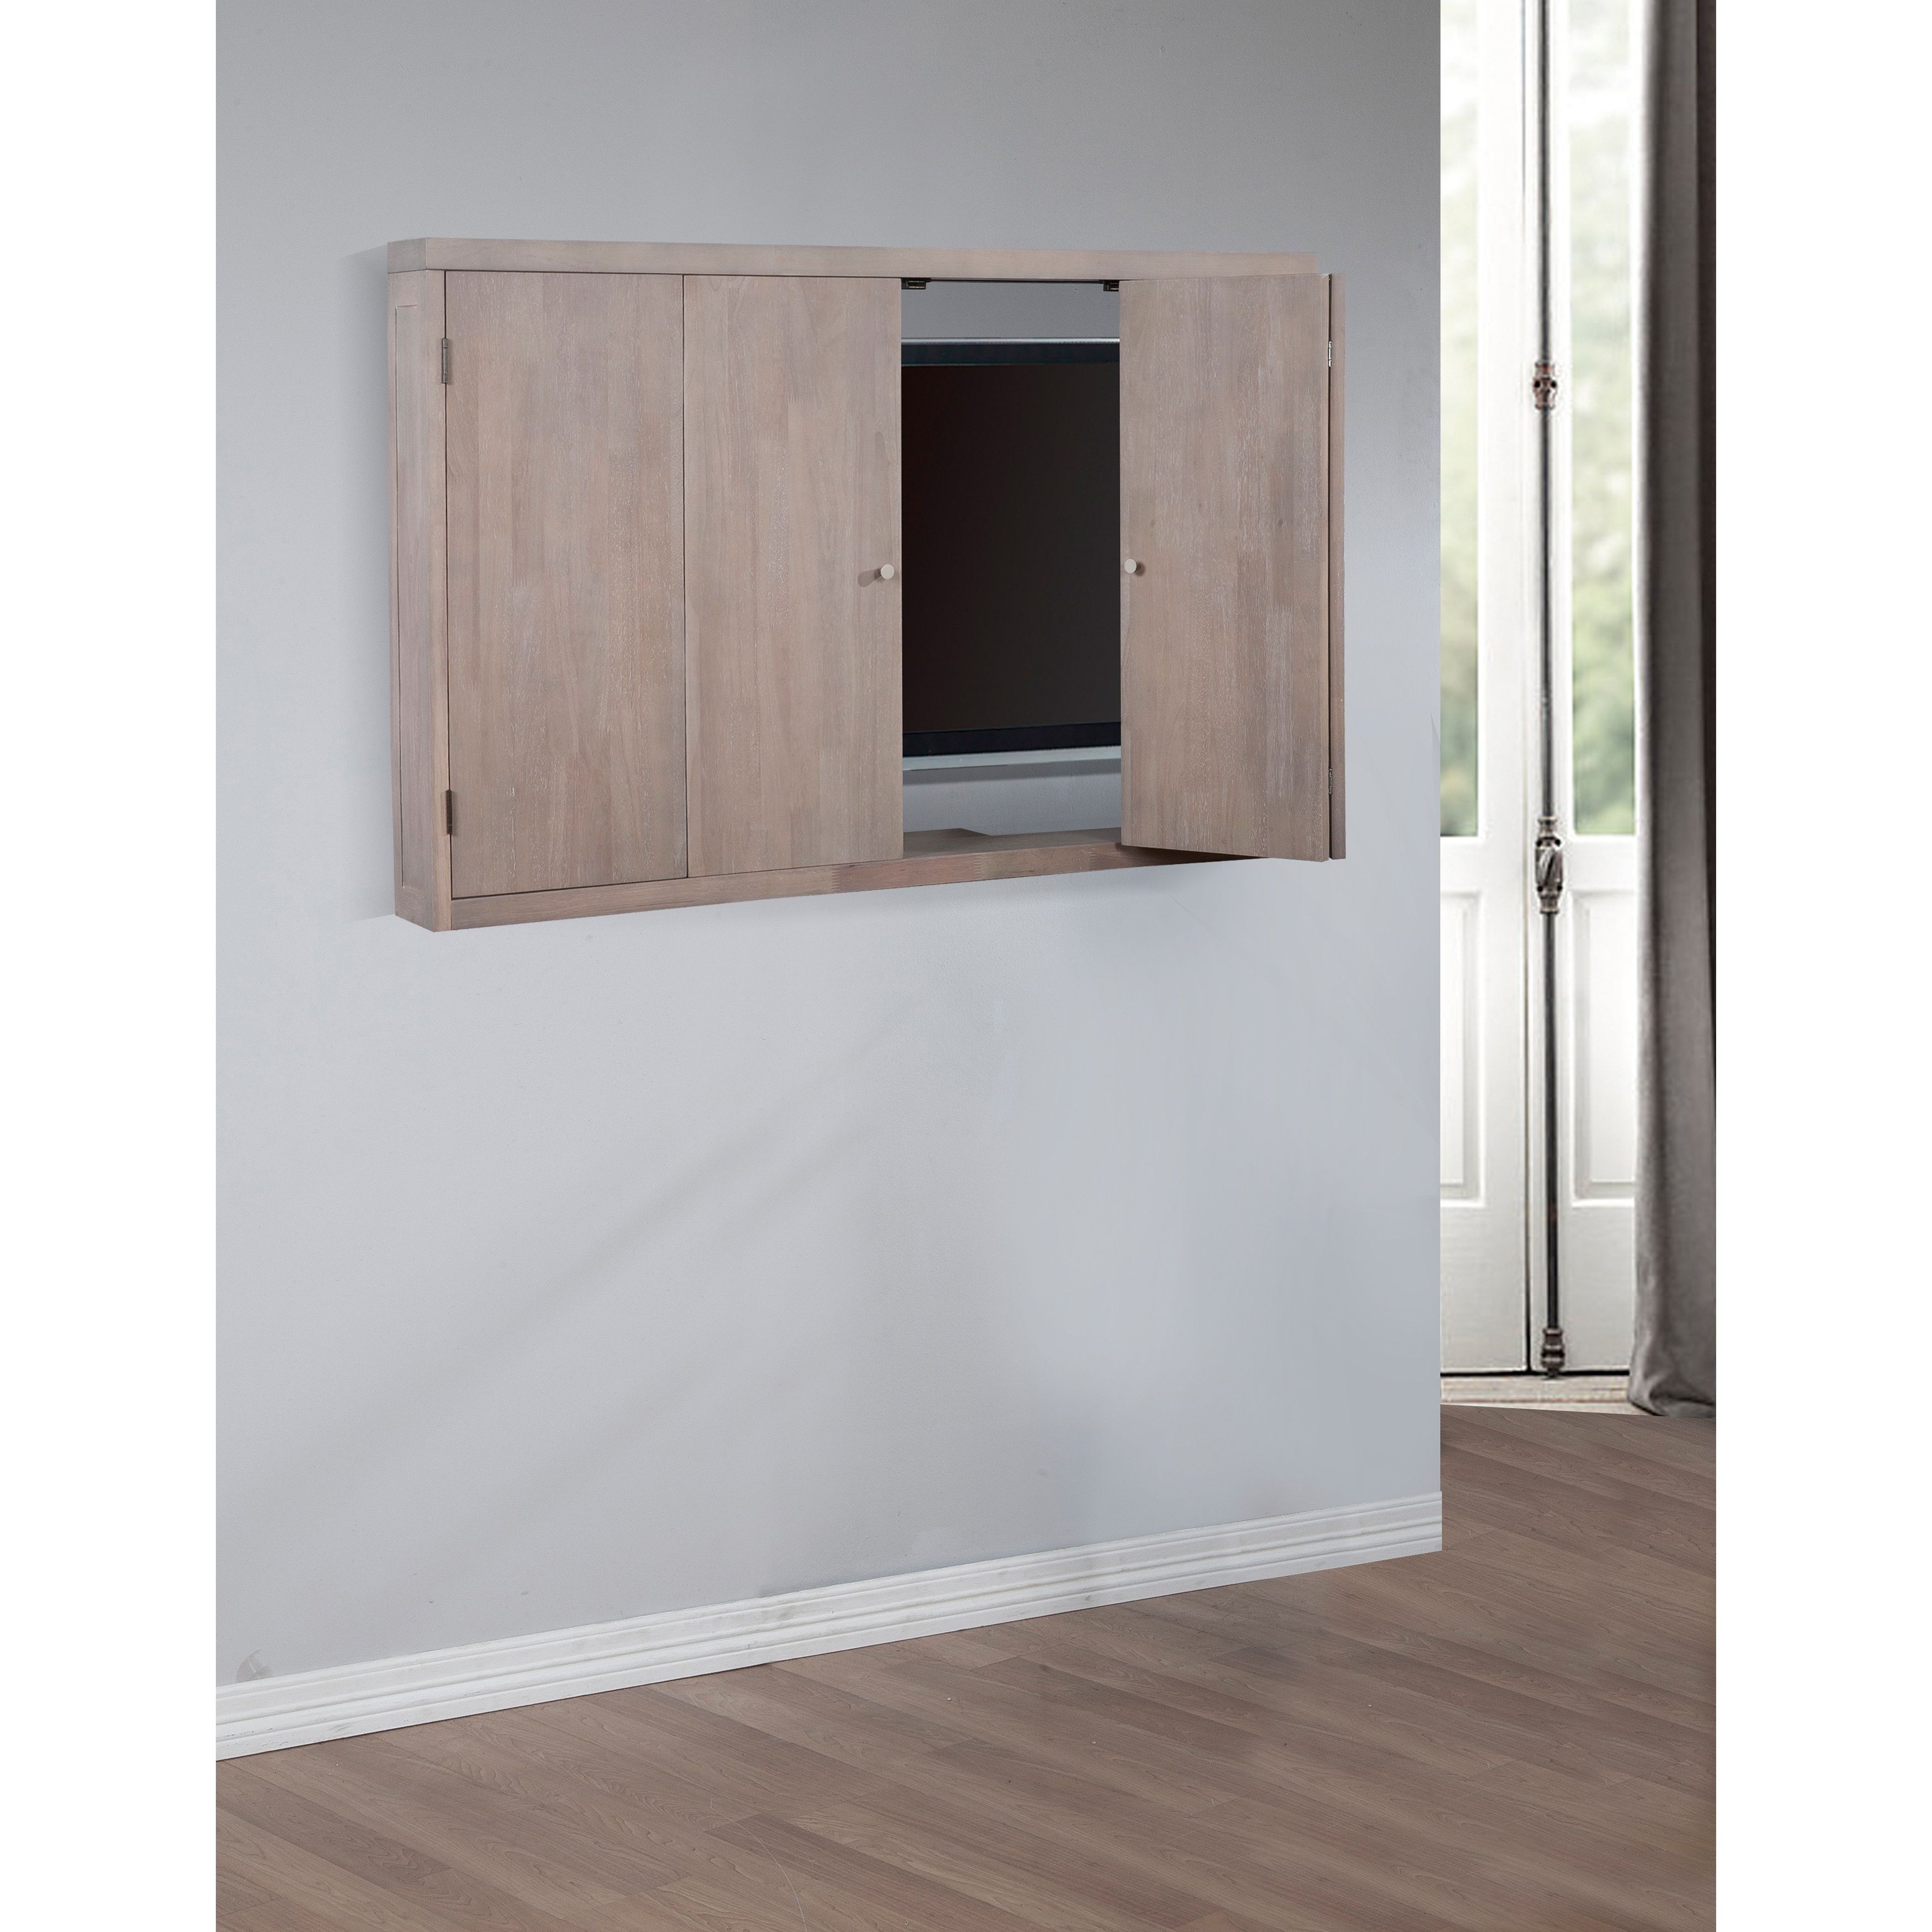 Wall Mounted Tv Cabinets For Flat Screens With Doors Throughout Well Known Hide Tv Cabinets For Flat Screens – Image Cabinets And Shower Mandra (View 11 of 20)